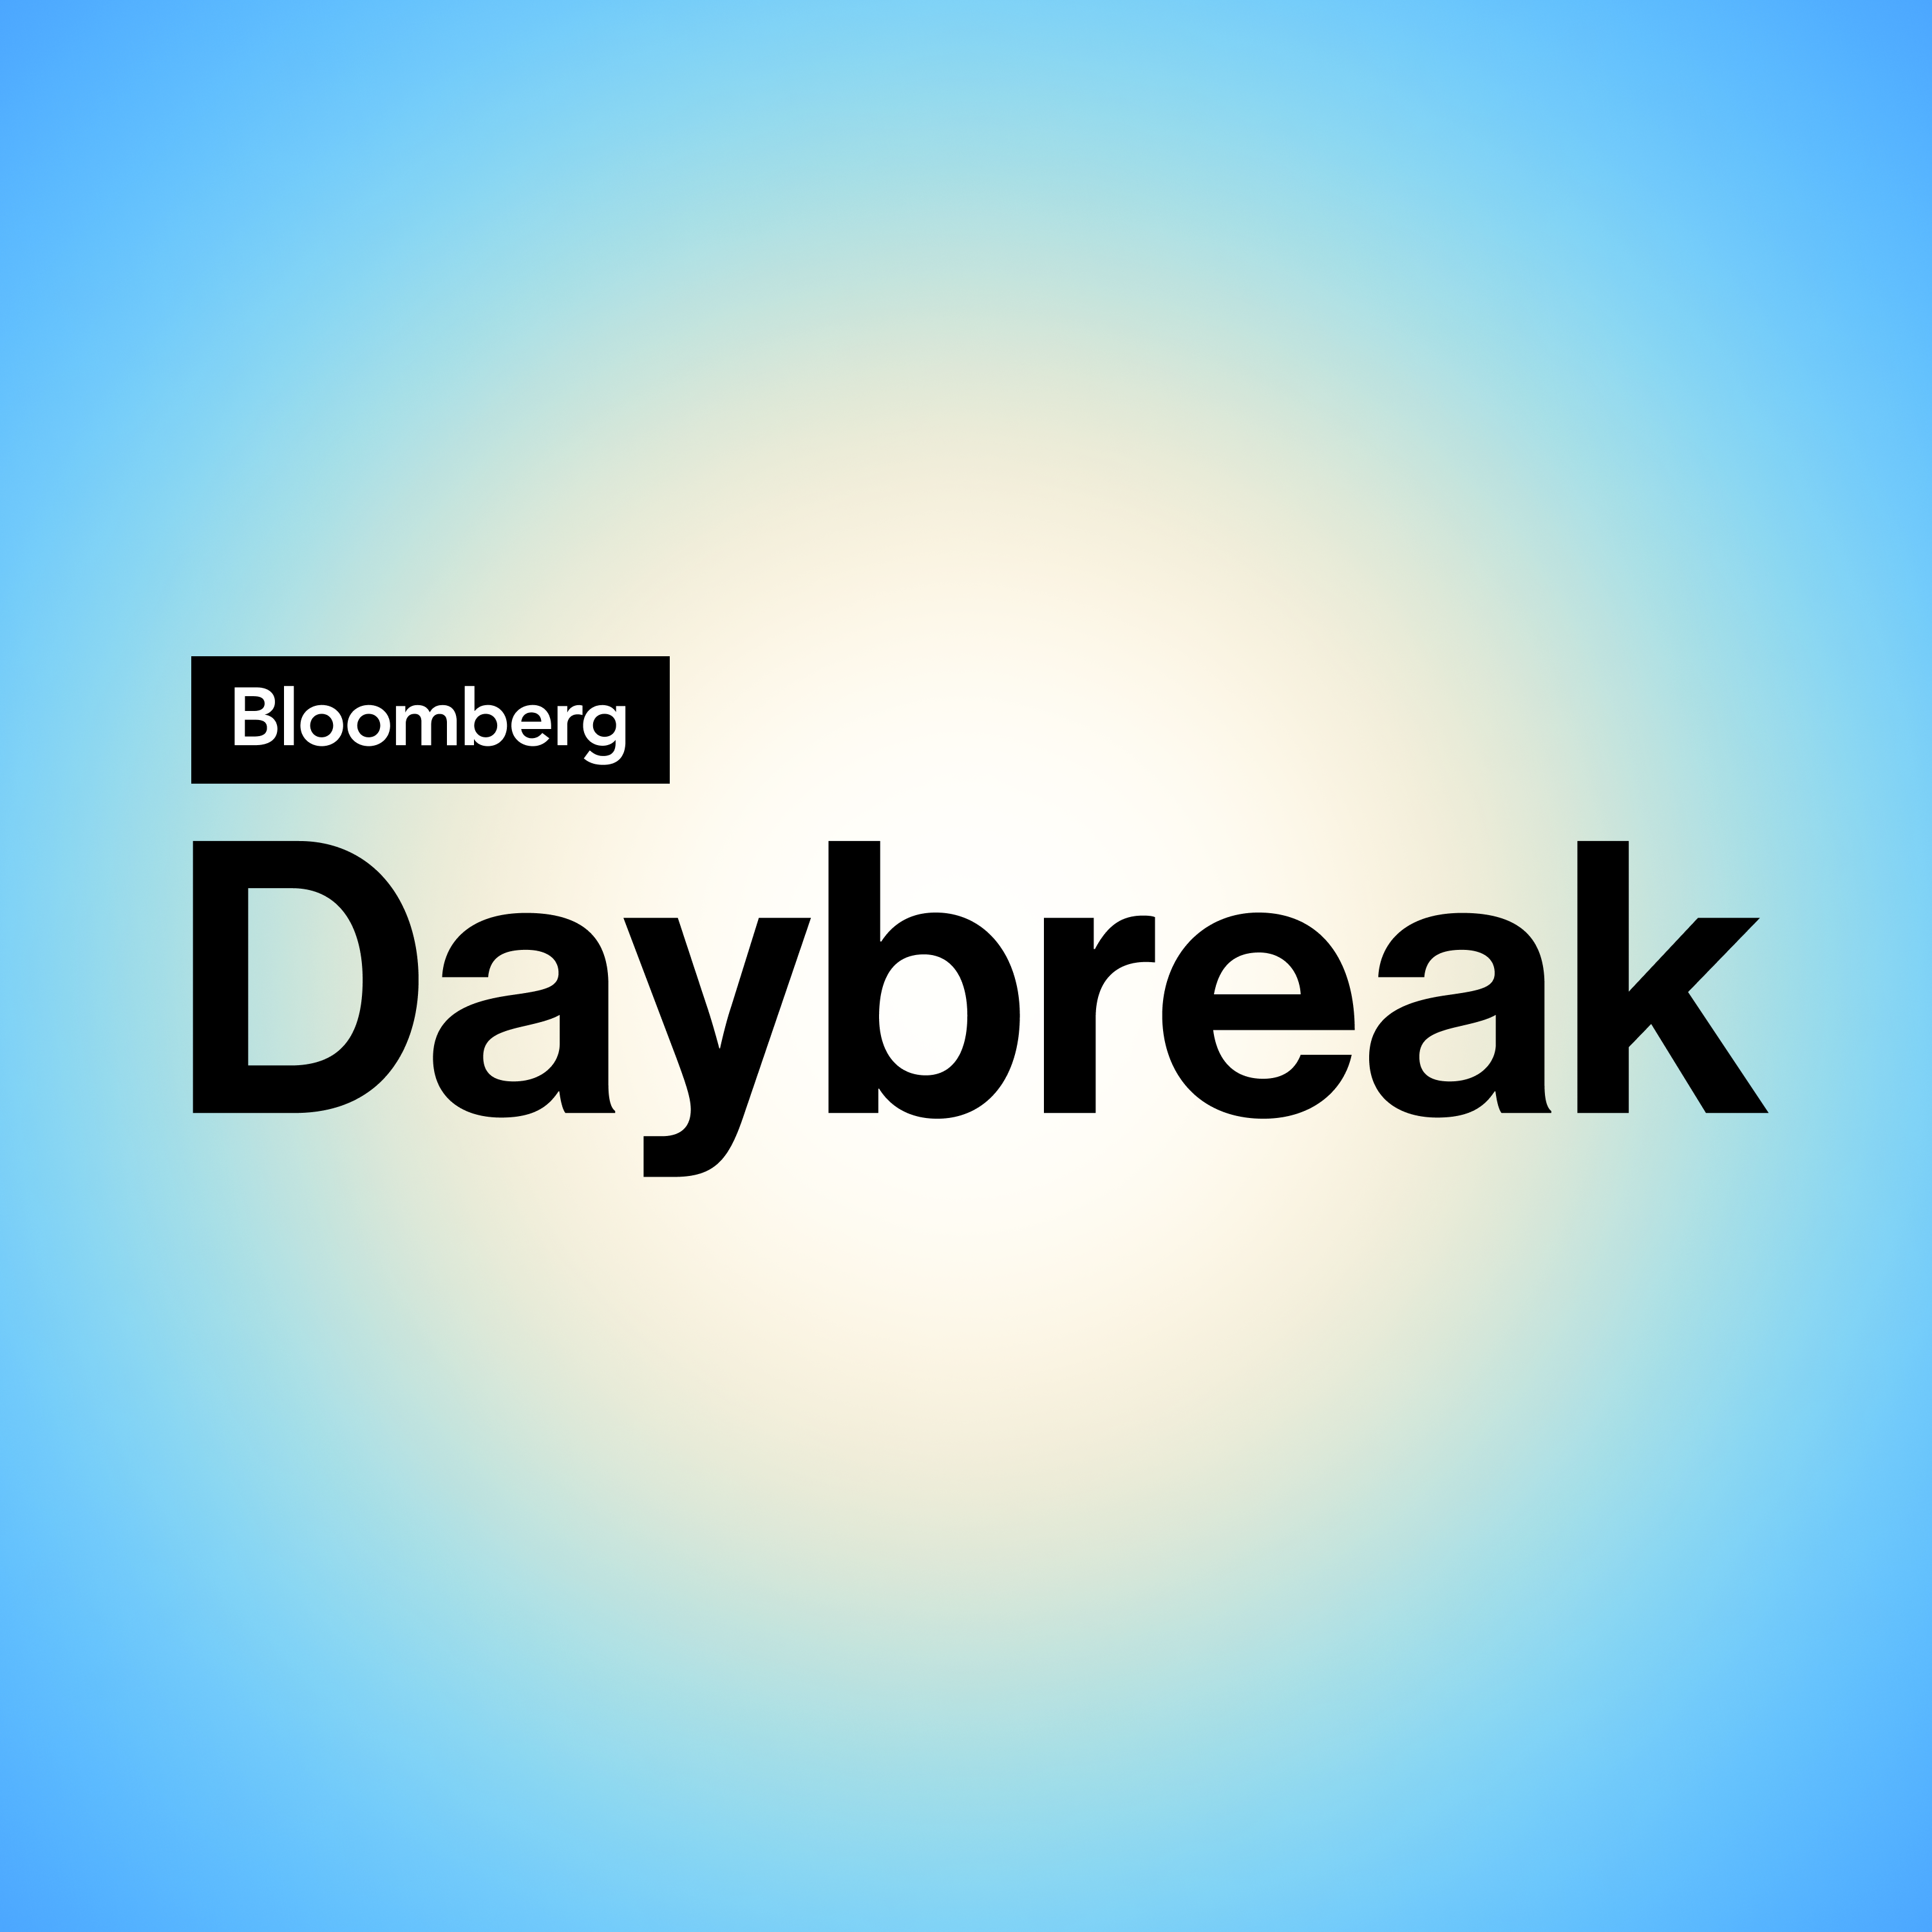 Daybreak Weekend: Central Bank Decisions, China's Economy, Congress in the New Year